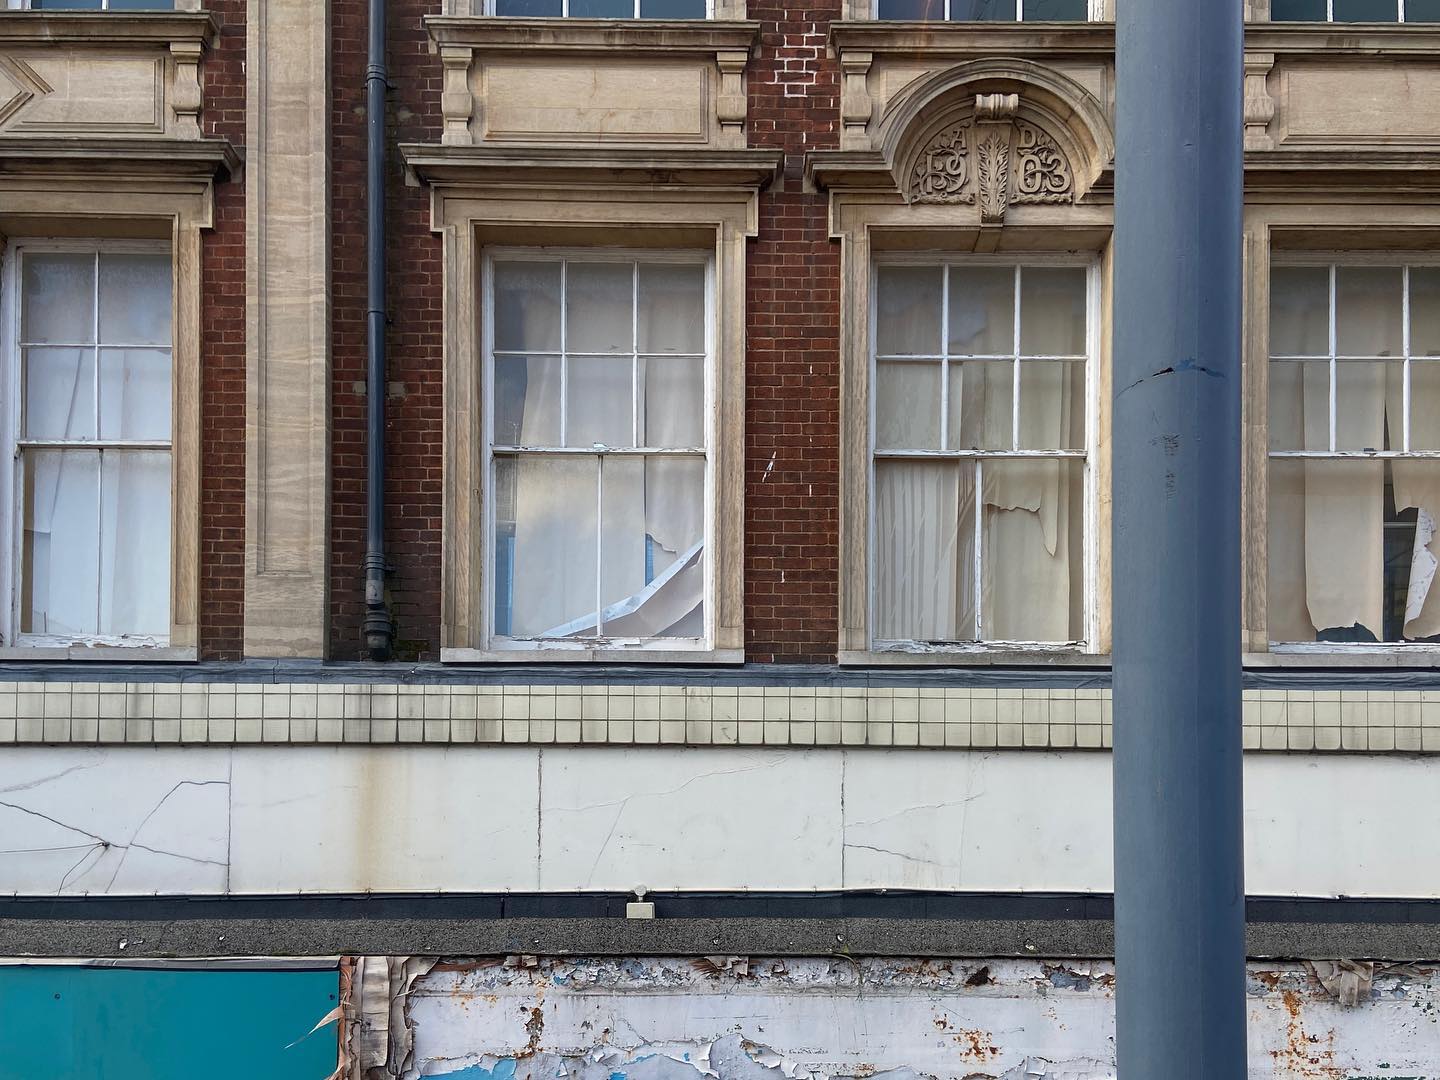 sash windows decay over falling frontage, grey pole interjects